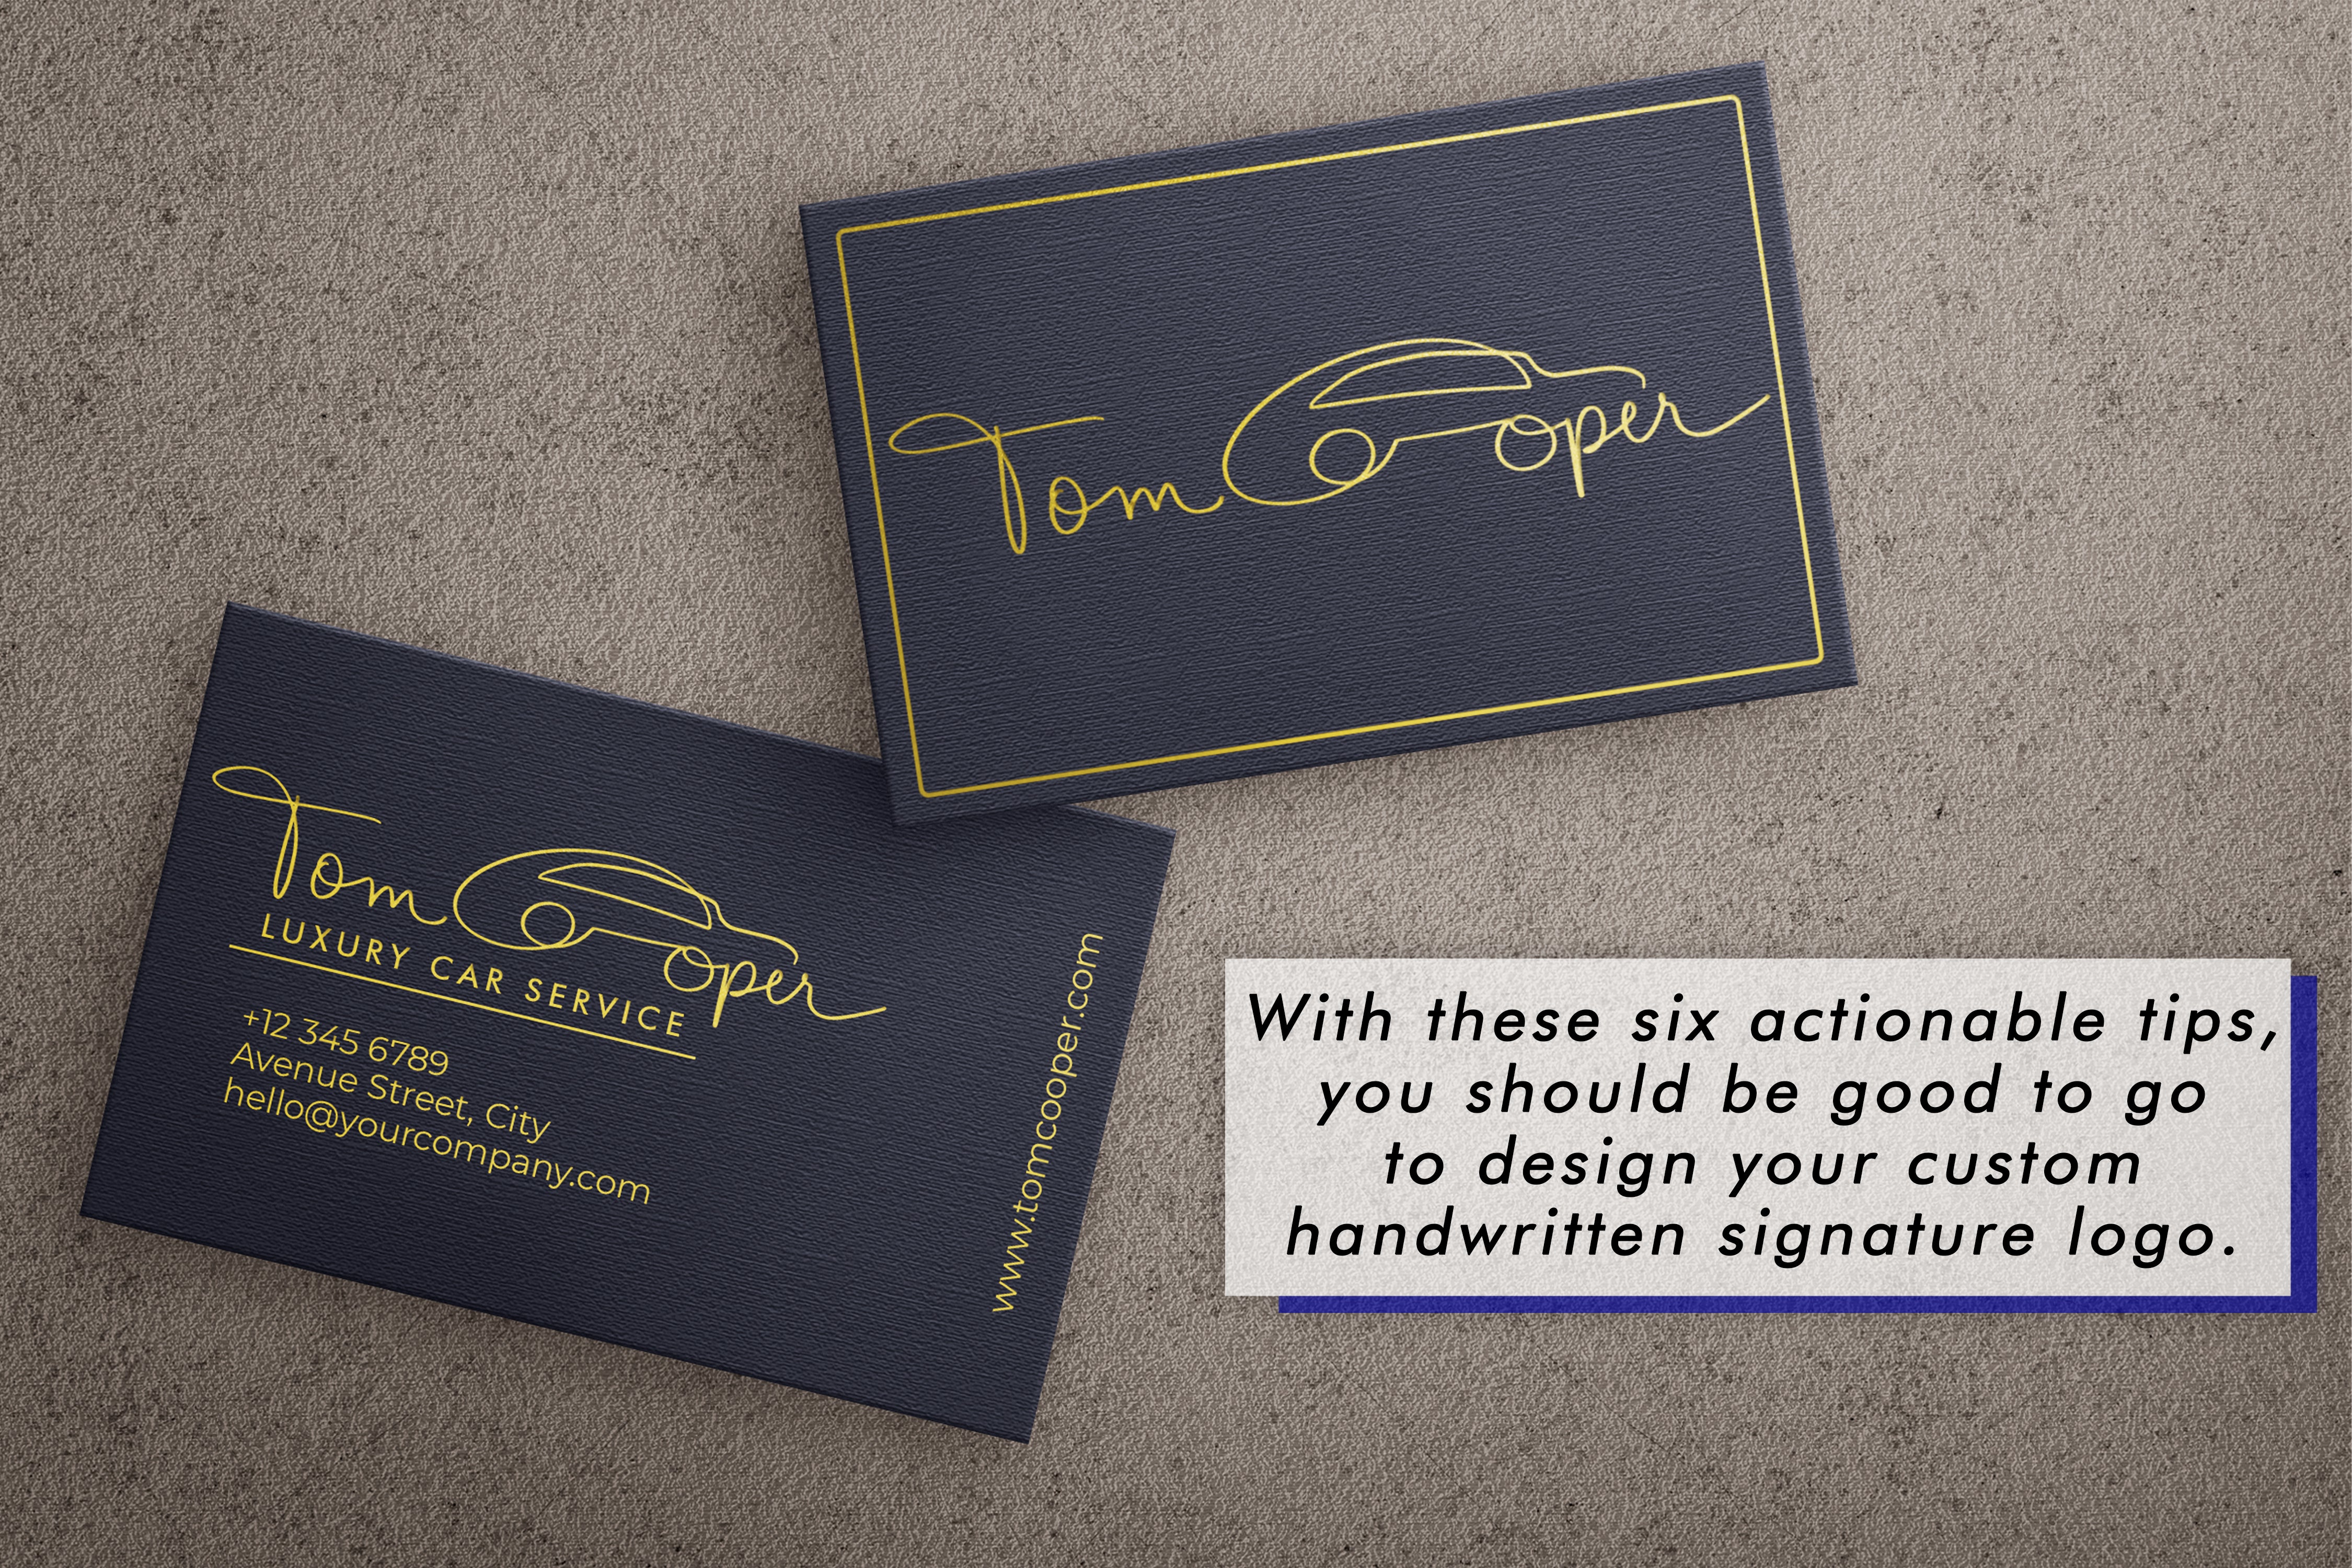 With these six actionable tips, you should be good to go to design your custom handwritten signature logo.